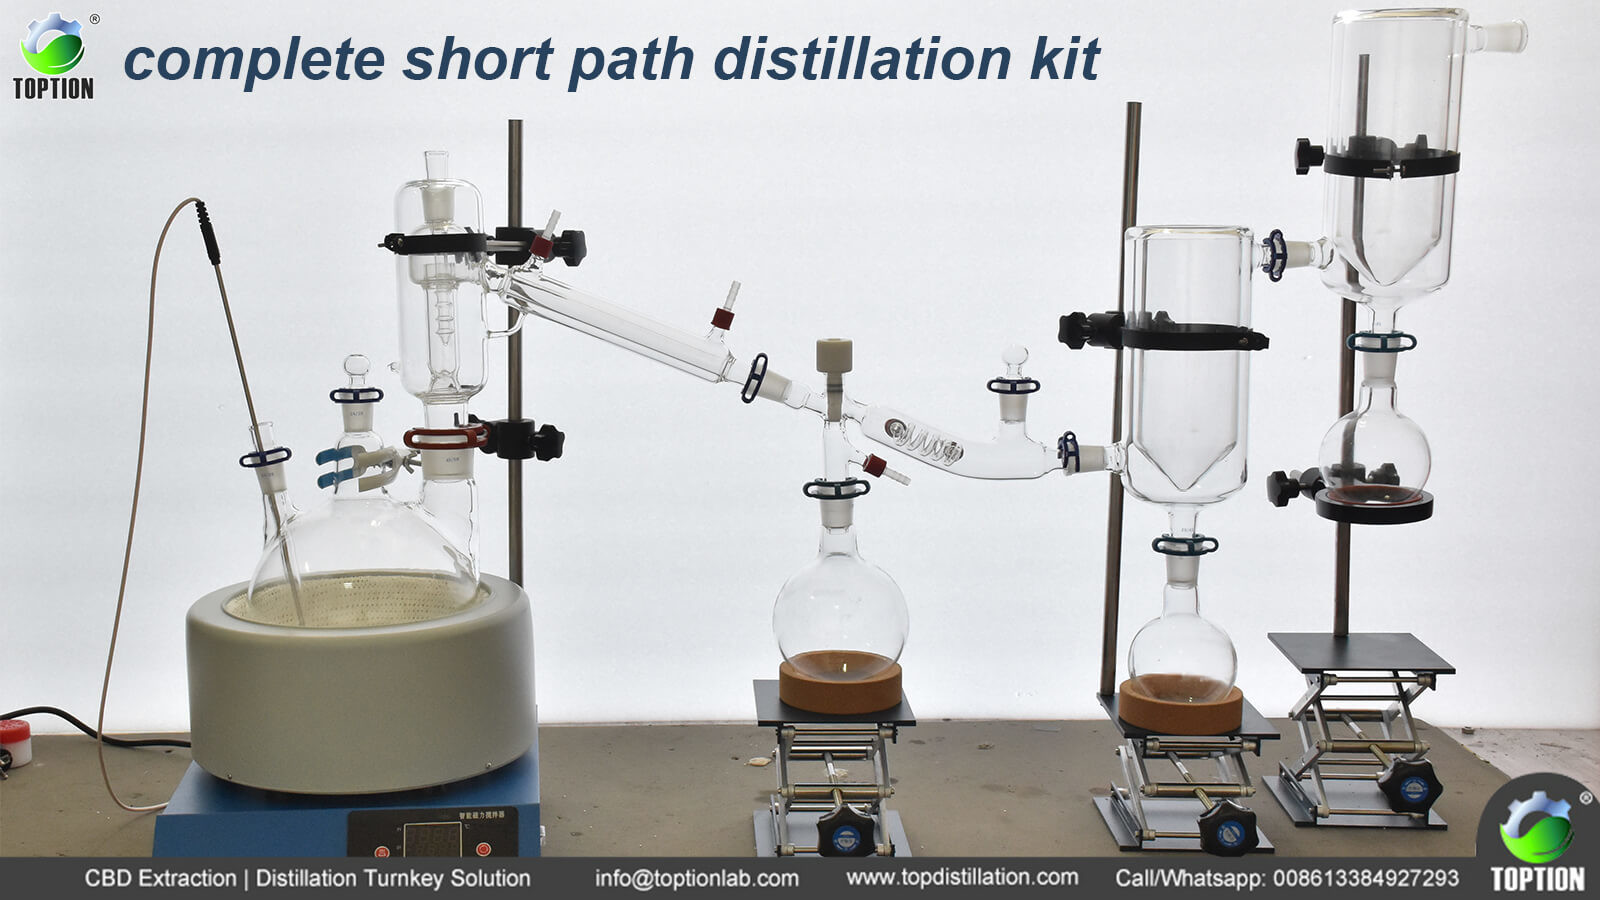 latest company news about Complete short path distillation kit  0